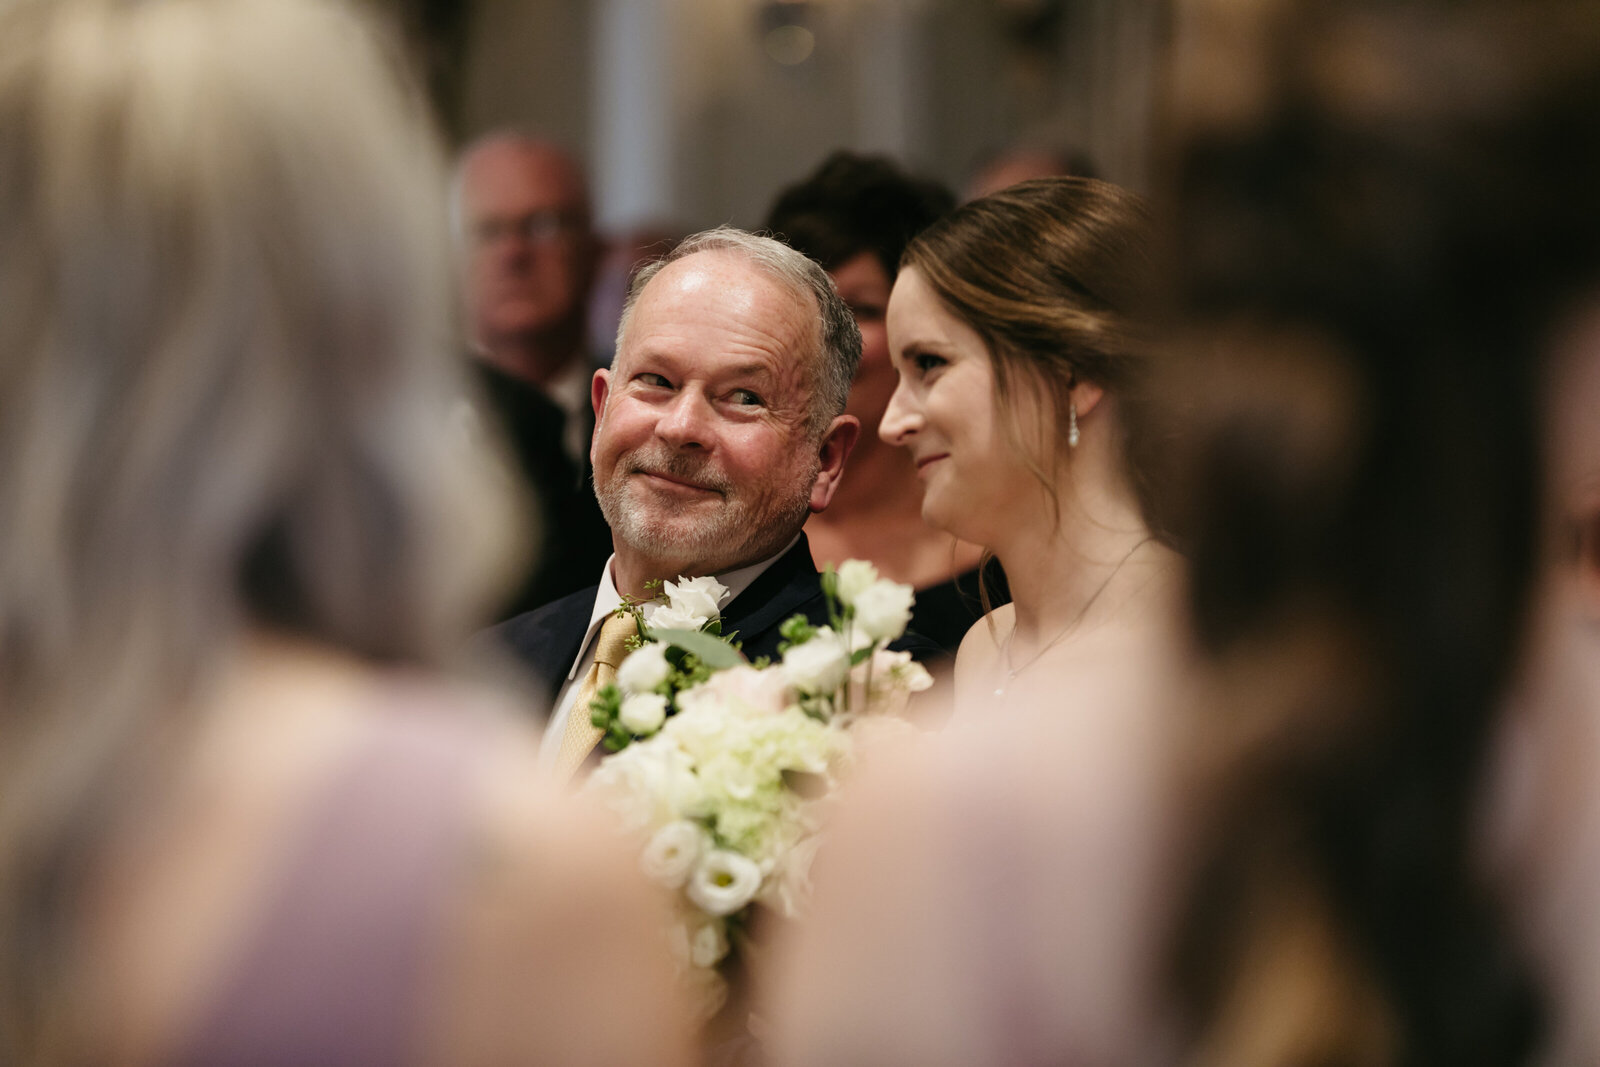 The father of the bride smiles at the bride at the altar